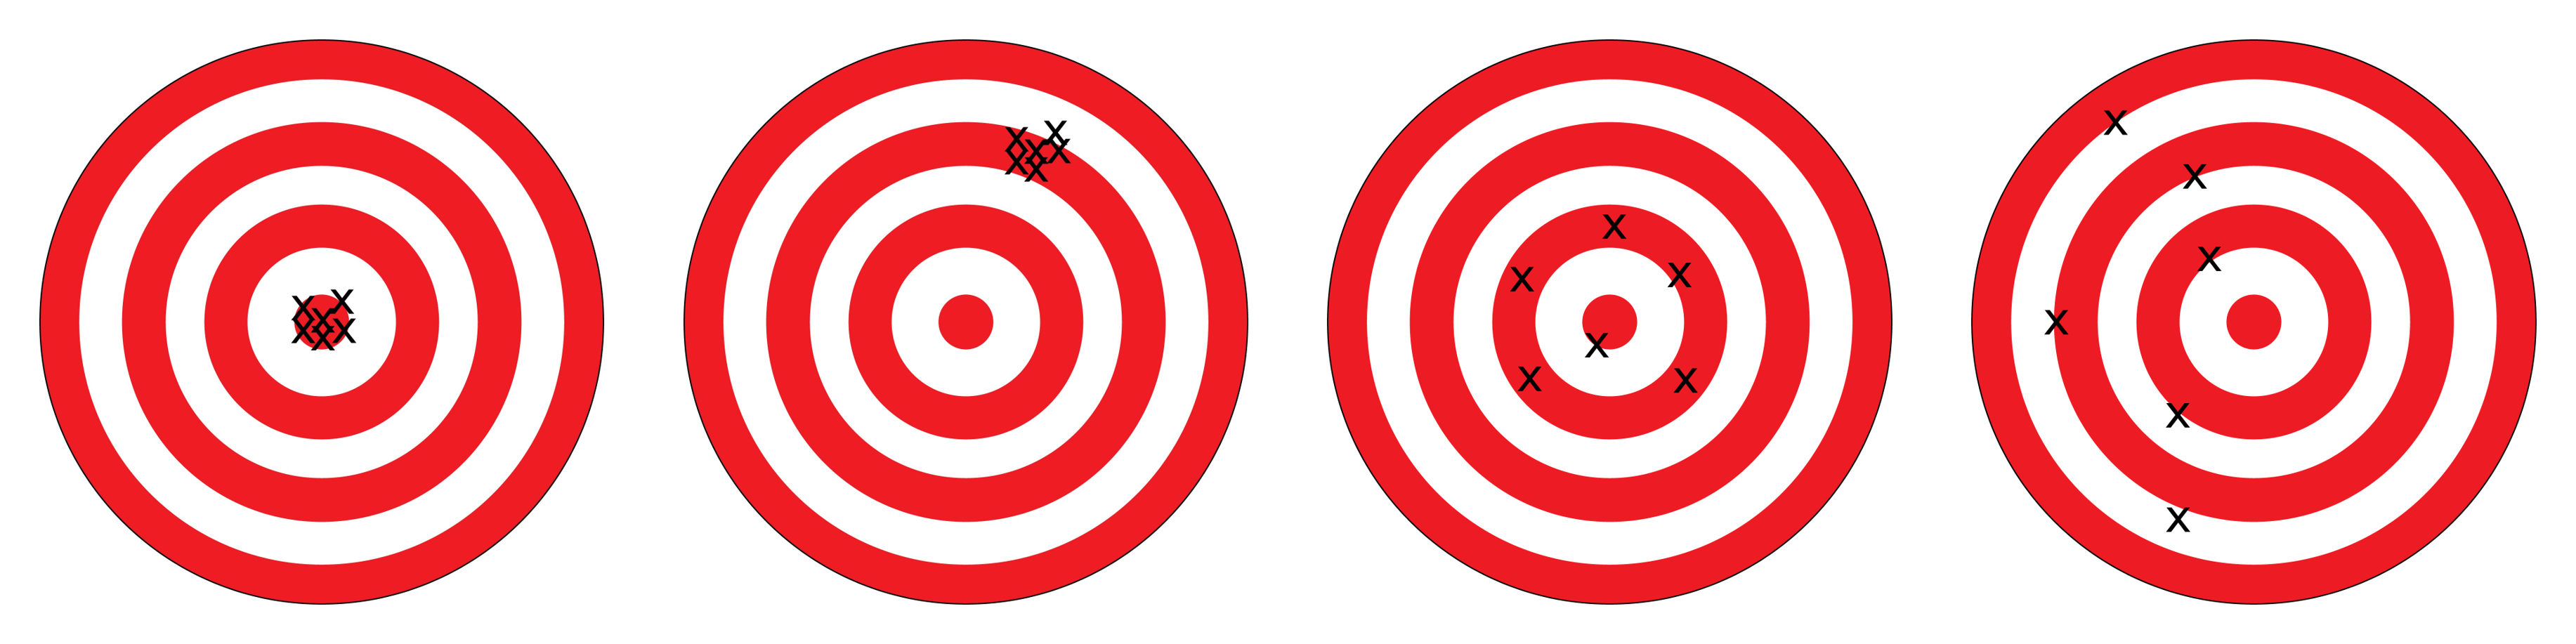 Four dartboards are presented. The first dartboard has six x
characters grouped close together at the center target of the
dartboard. The second dartboard has six x characters grouped
close together but far from the center target of the dartboard.
The third dartboard has six x characters spread out but
centered around the center target of the dartboard. The fourth
dartboard has six x characters spread out all over the
dartboard with no pattern or clear center.